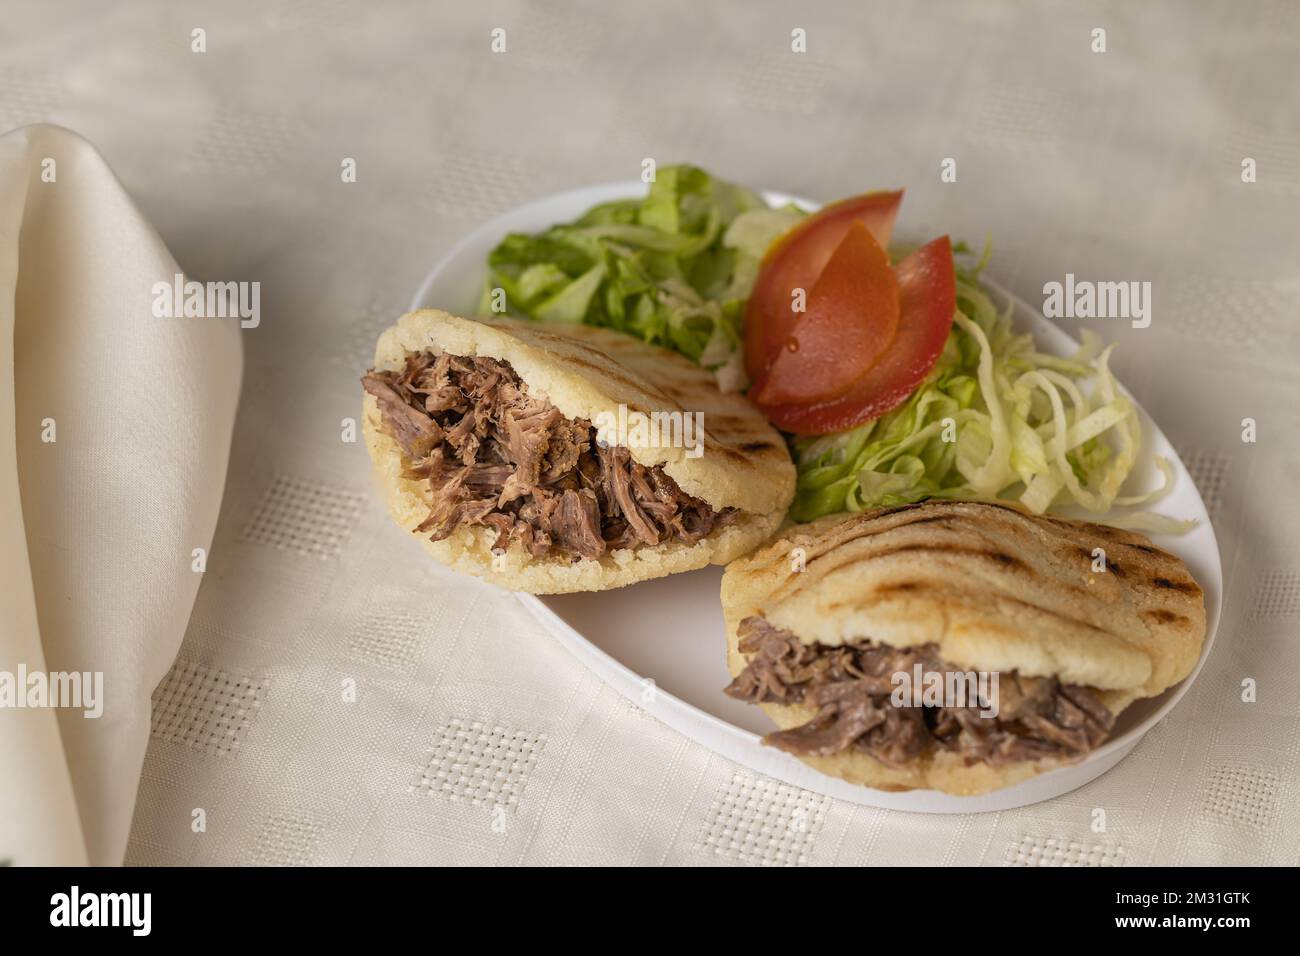 Arepas, typical Venezuelan food, made with maize and filled with shredded meat on white tablecloth. Stock Photo